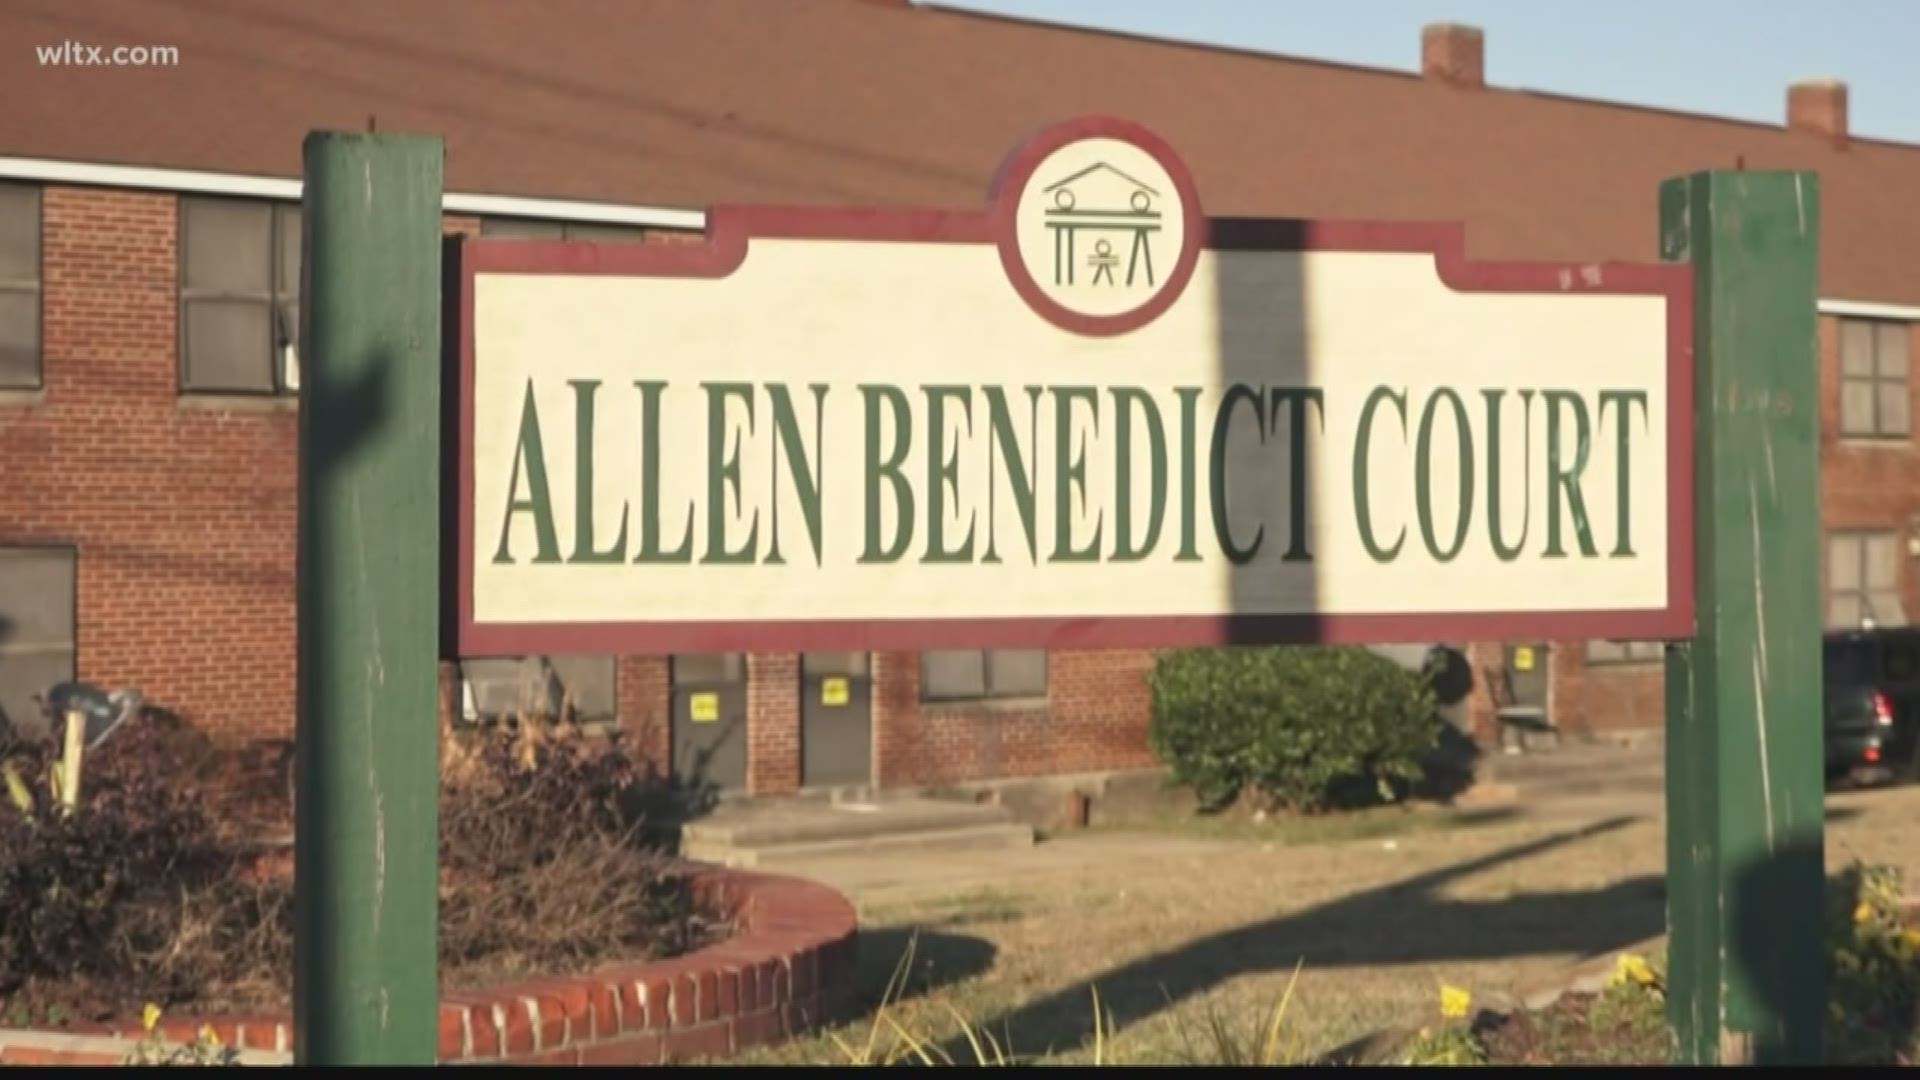 The Fifth Circuit Solicitor along with Columbia Police and Fire departments will hold a press conference on Wednesday on Allen Benedict Court deaths